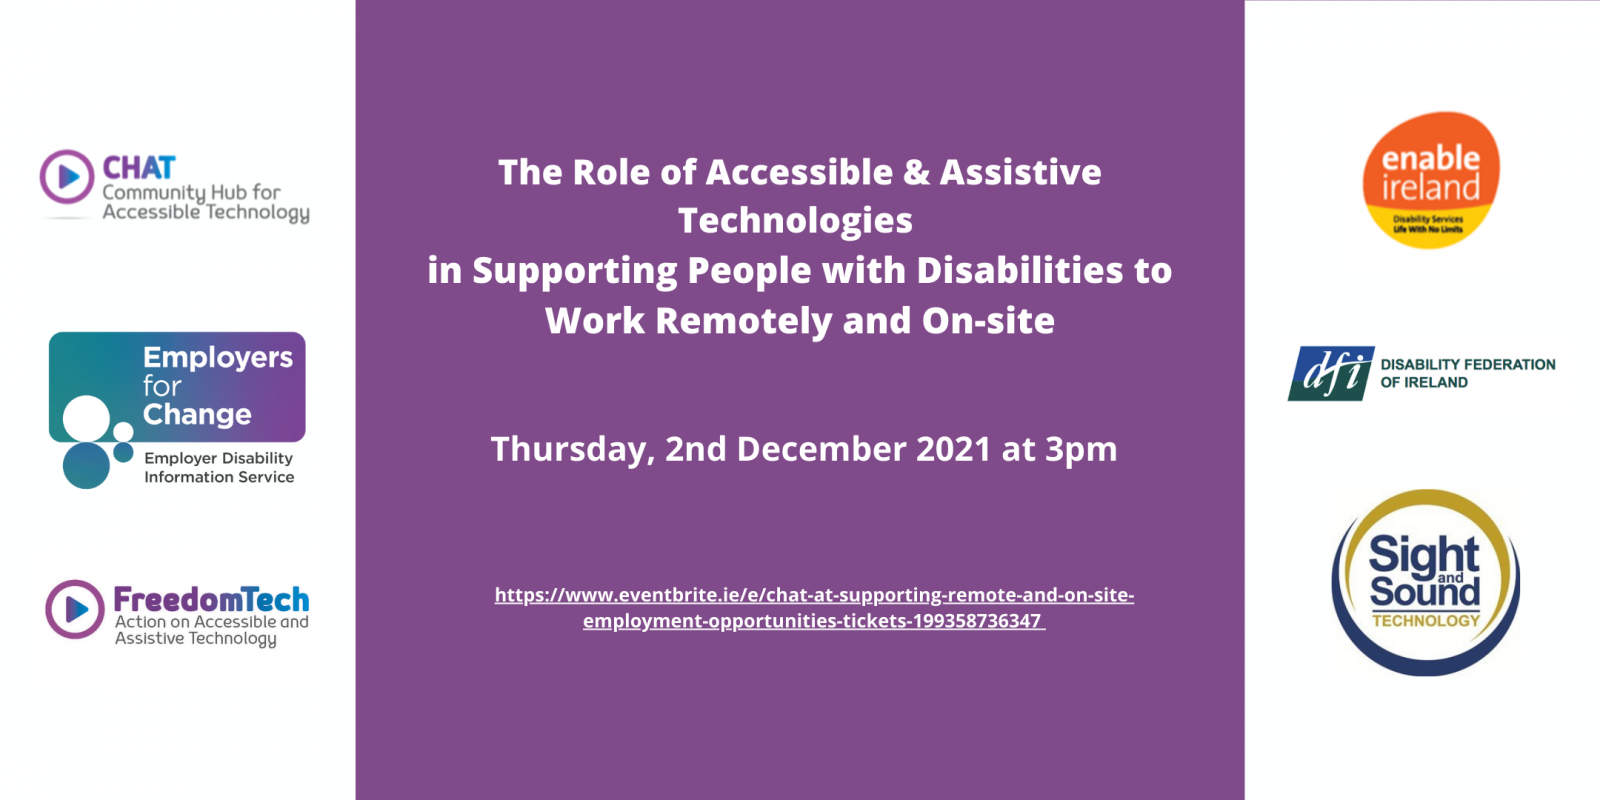 The role of Accessible and Assistive Technologies in supporting people with disabilities to work remotely and on-site. CHAT cohosted by Freedom Tech and Employers for Change in conjunction with Enable Ireland, DFI and Sight and Sound. Event at 3pm on Thurs, 2nd December 2021. Register on eventbrite. 